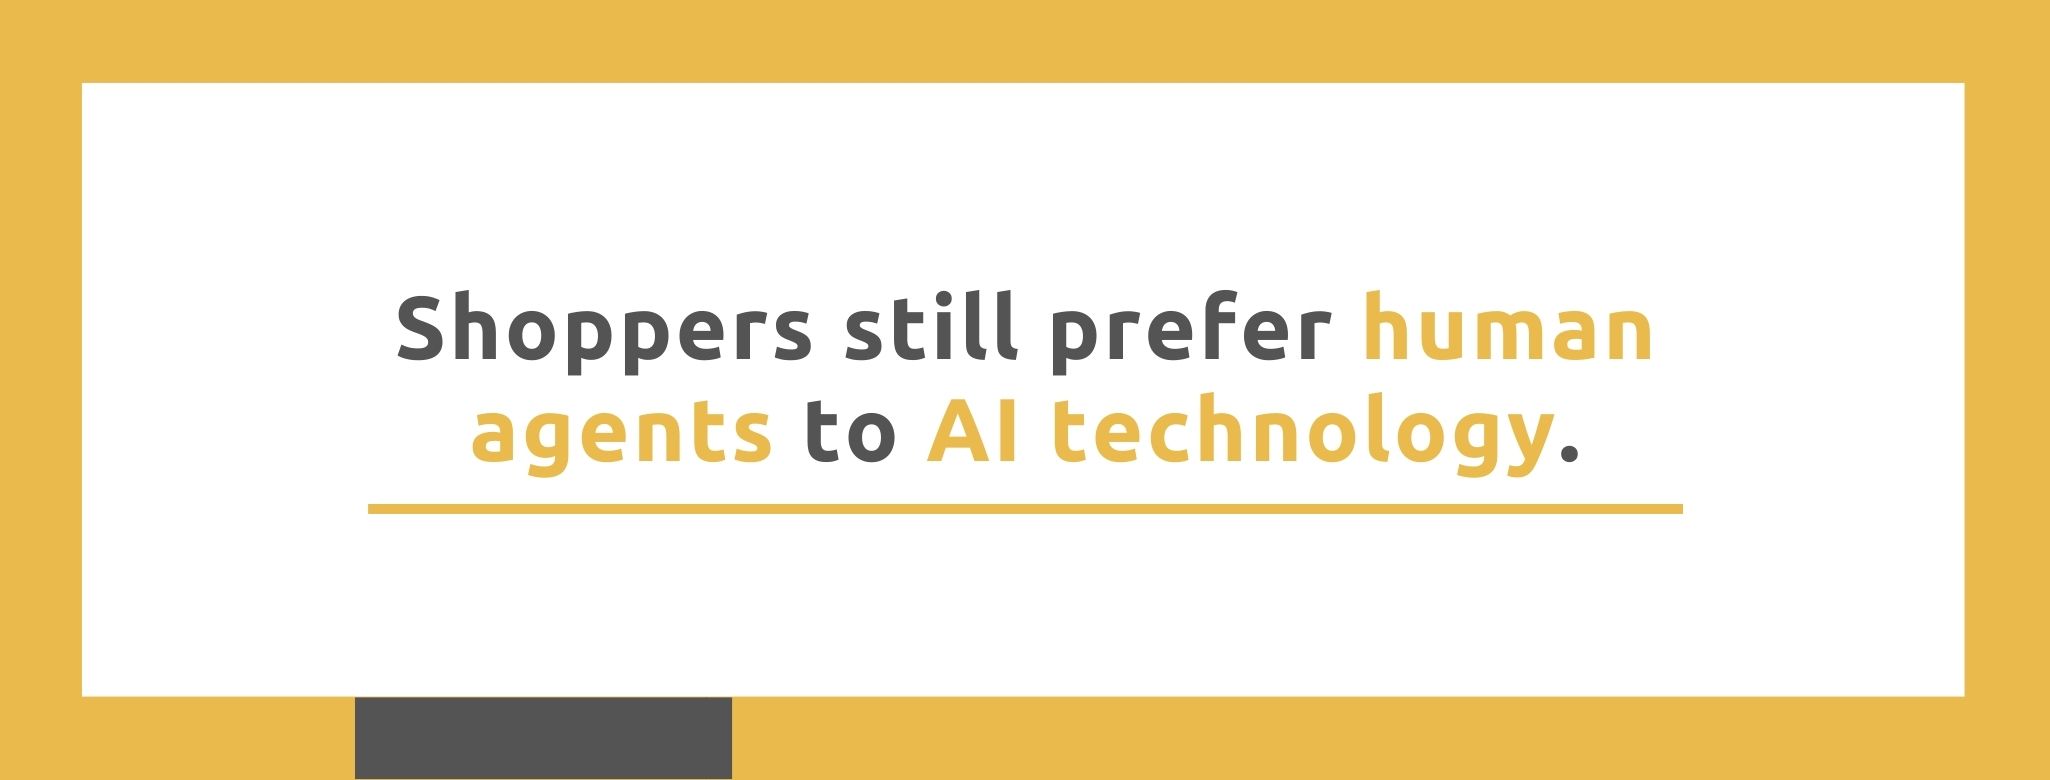 Shoppers still prefer human agents to AI technology. - 22 Live Chat Statistics - Replyco